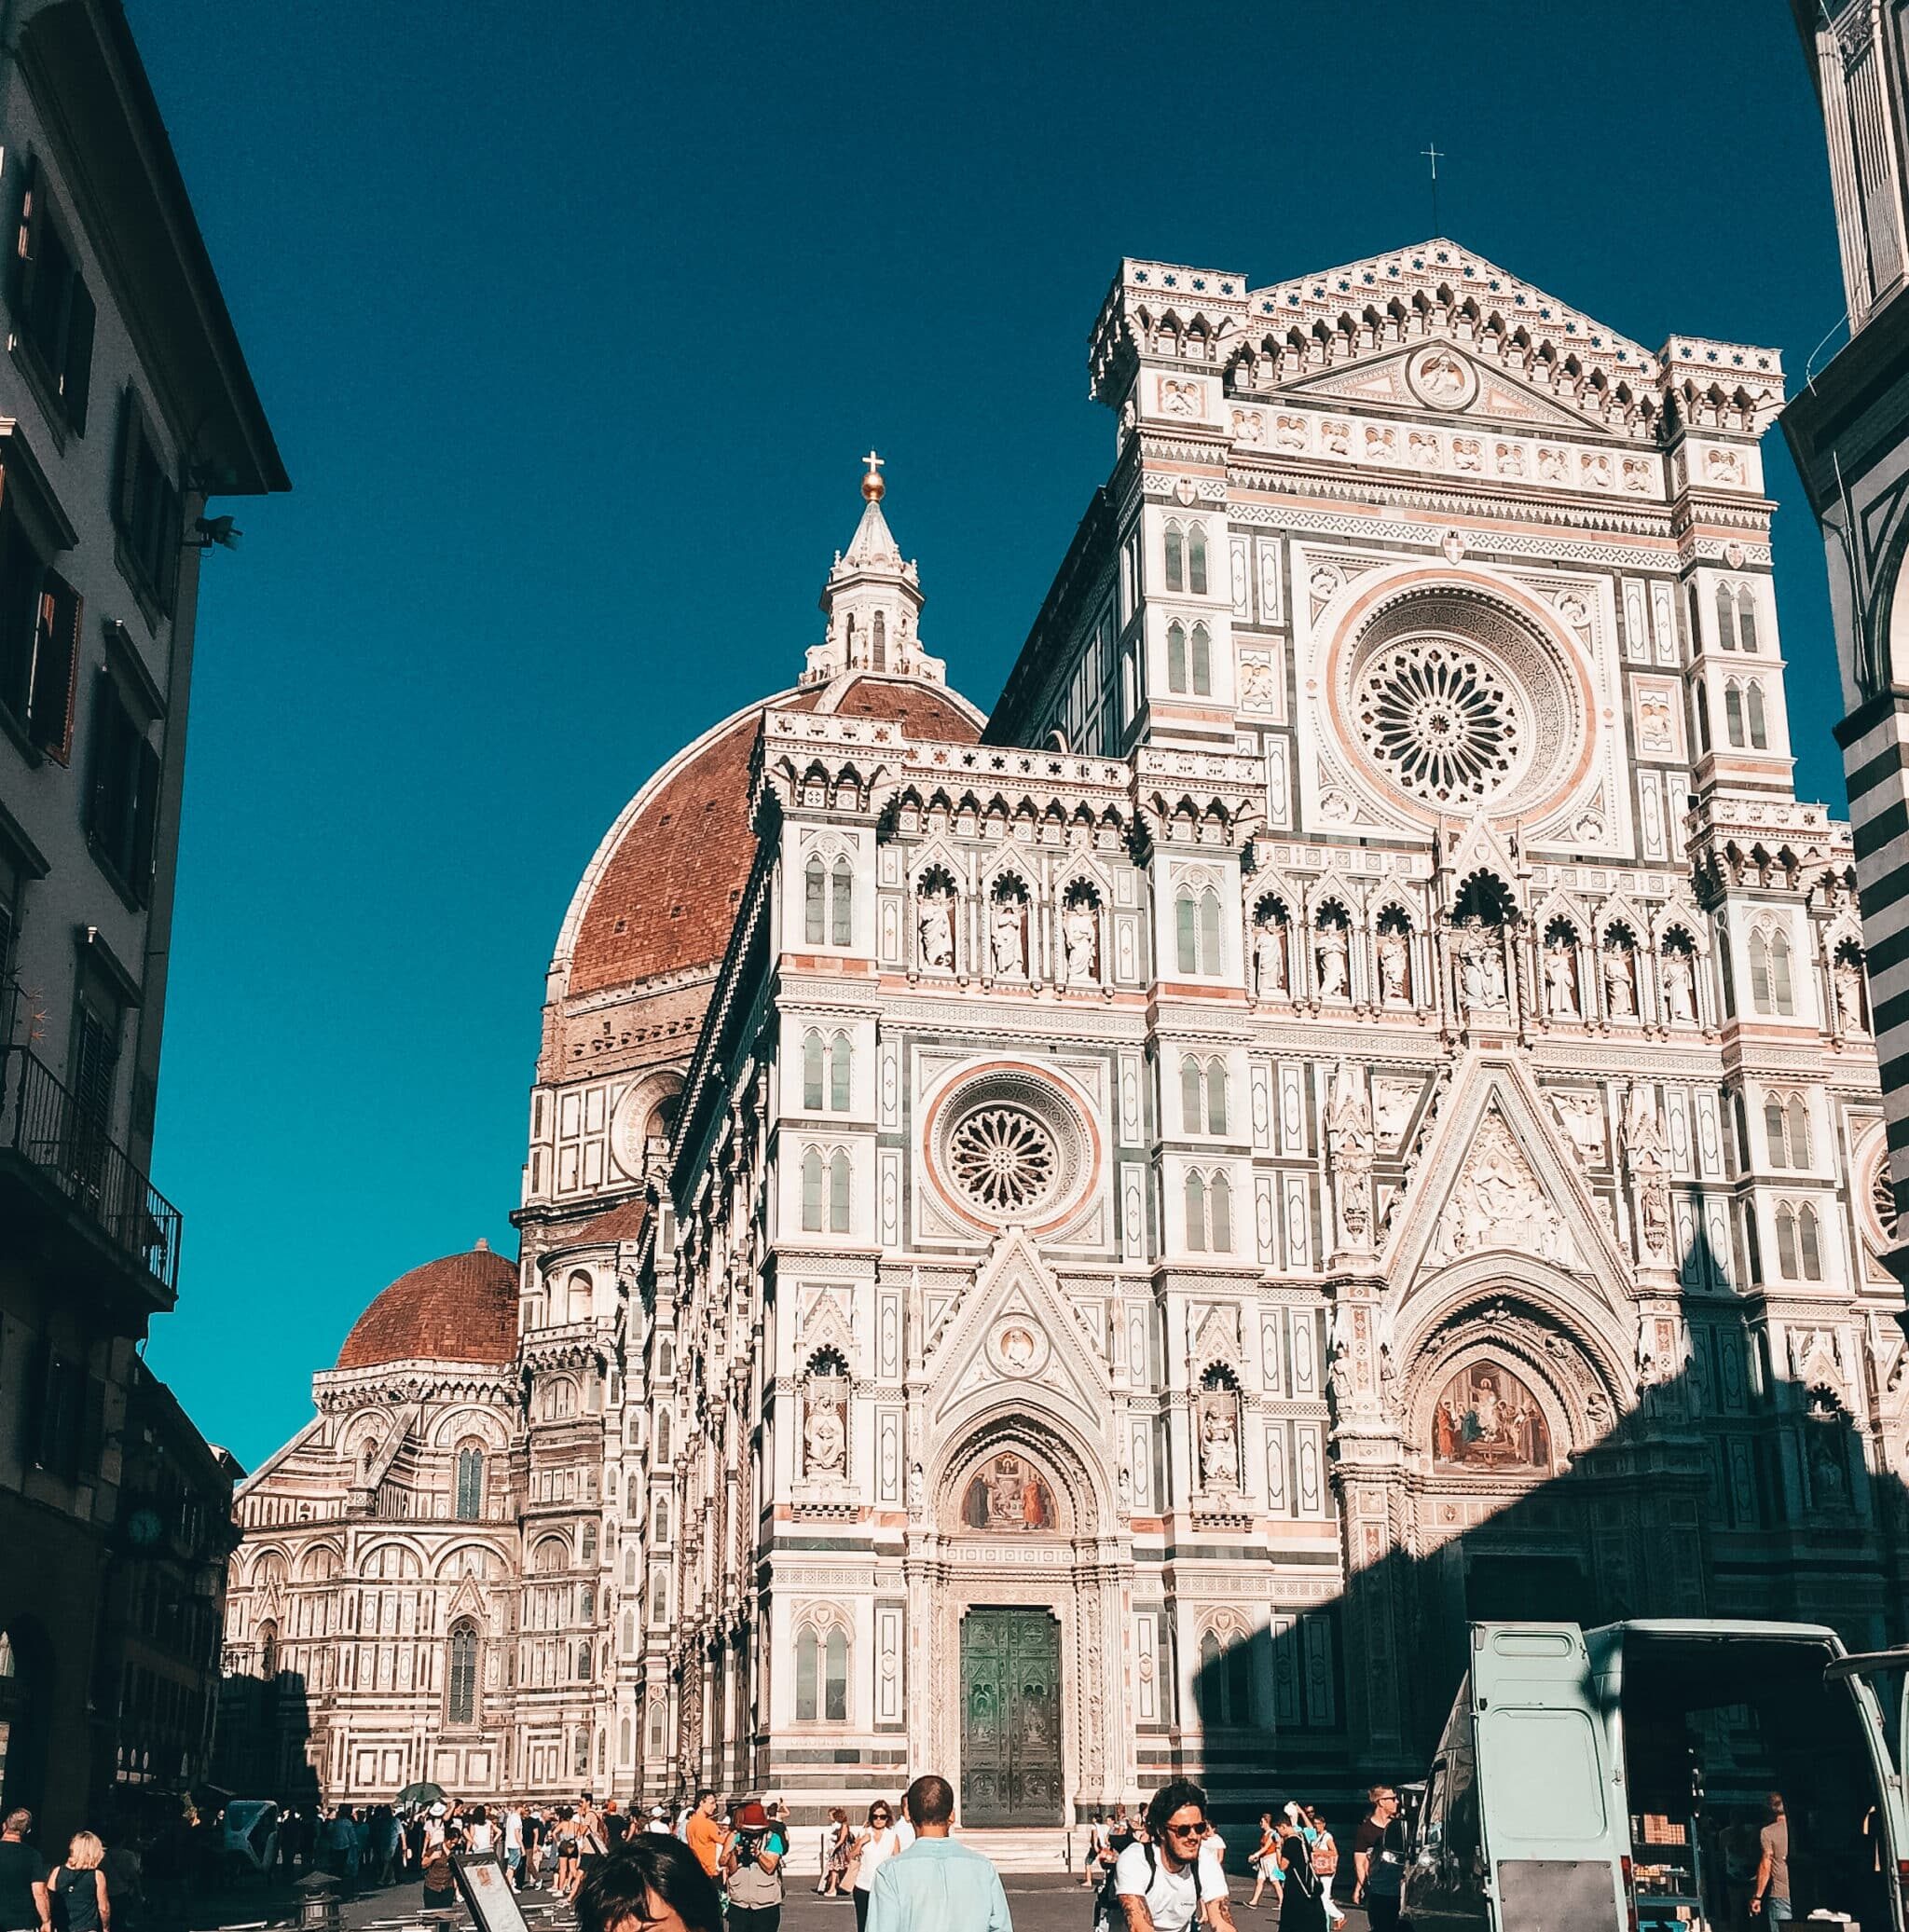 Curiosities about Florence